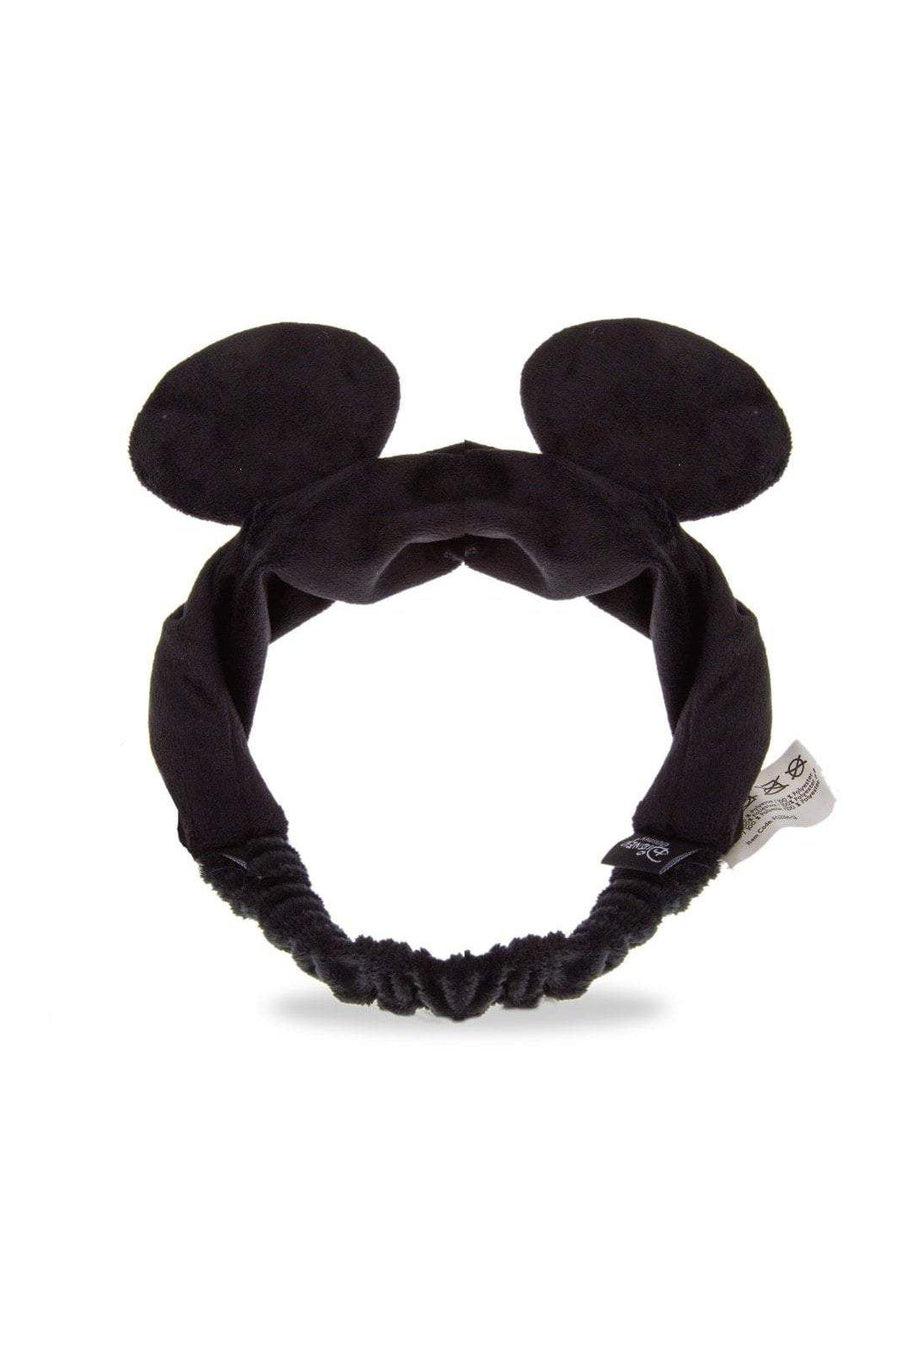 Buy Disney Mickey &amp; Friends Makeup Headbands at Spoiled Brat  Online - UK online Fashion &amp; lifestyle boutique